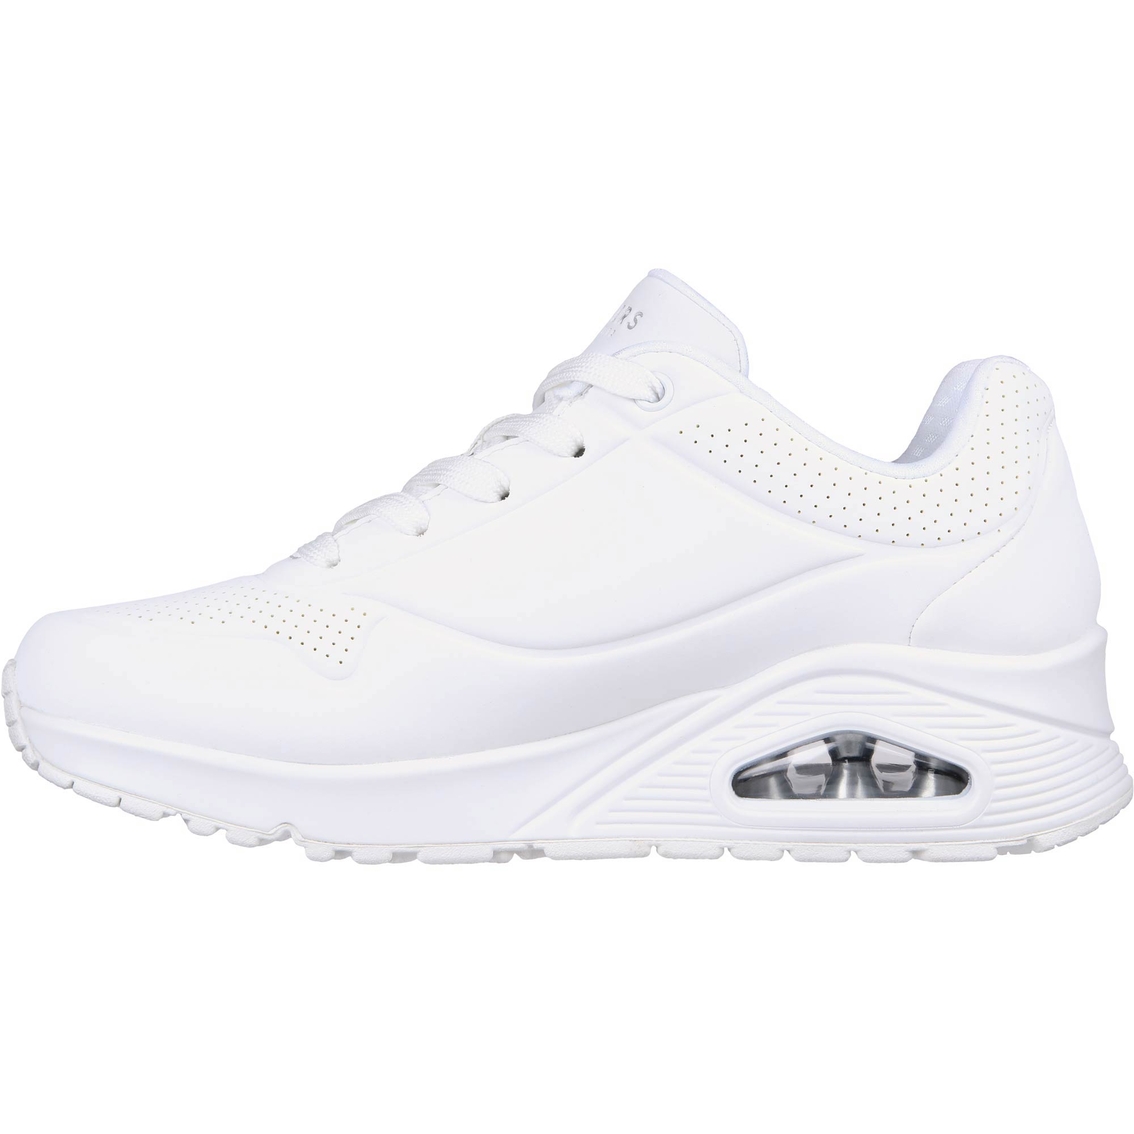 Skechers Women's Uno Stand On Air Sneakers - Image 3 of 5